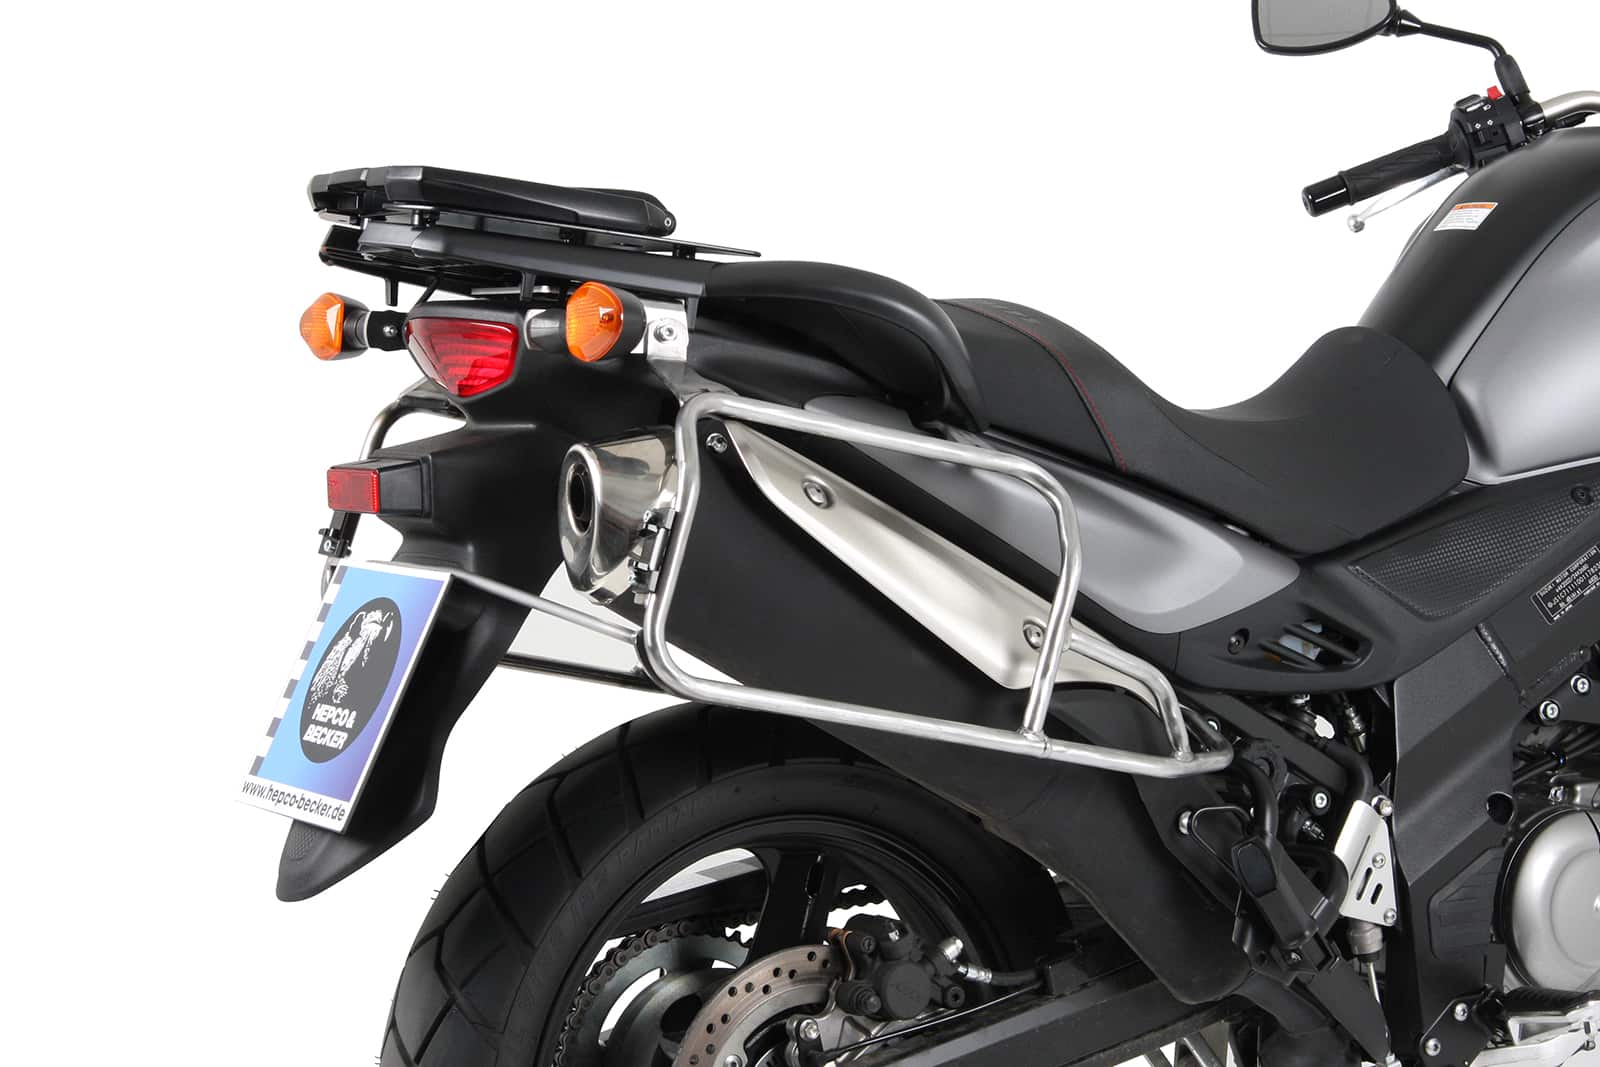 Sidecarrier Cutout stainless steel incl. Xplorer sideboxes silver for Suzuki V-Strom 650 ABS (2012-2016)